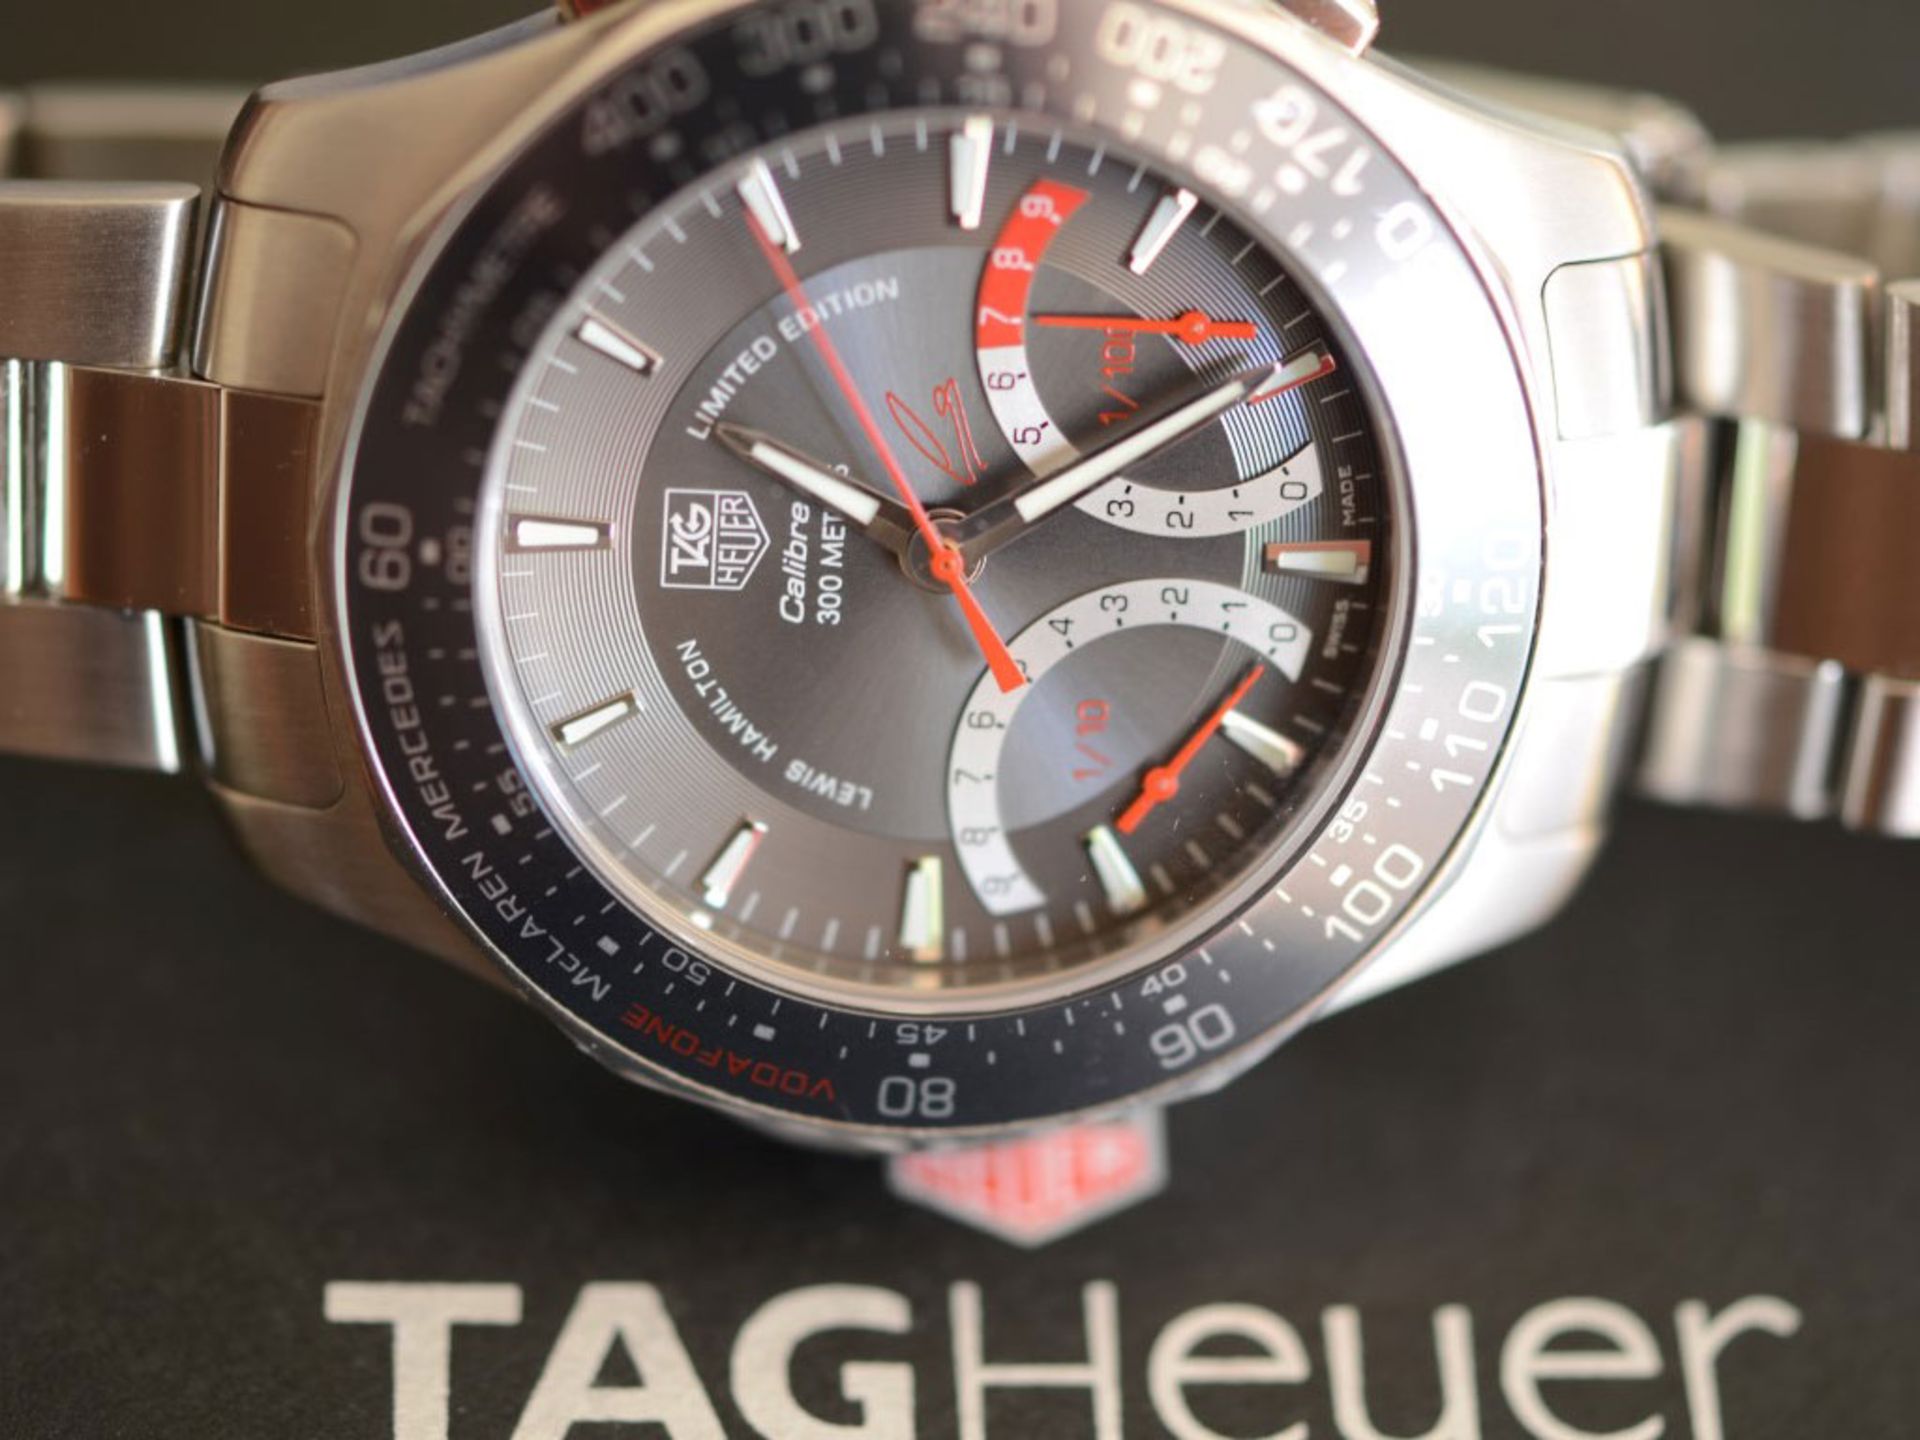 This limited edition, (41 of 3500), Lewis Hamilton Tag Heuer Caliber S Chronograph watch CF7114 - Image 2 of 2